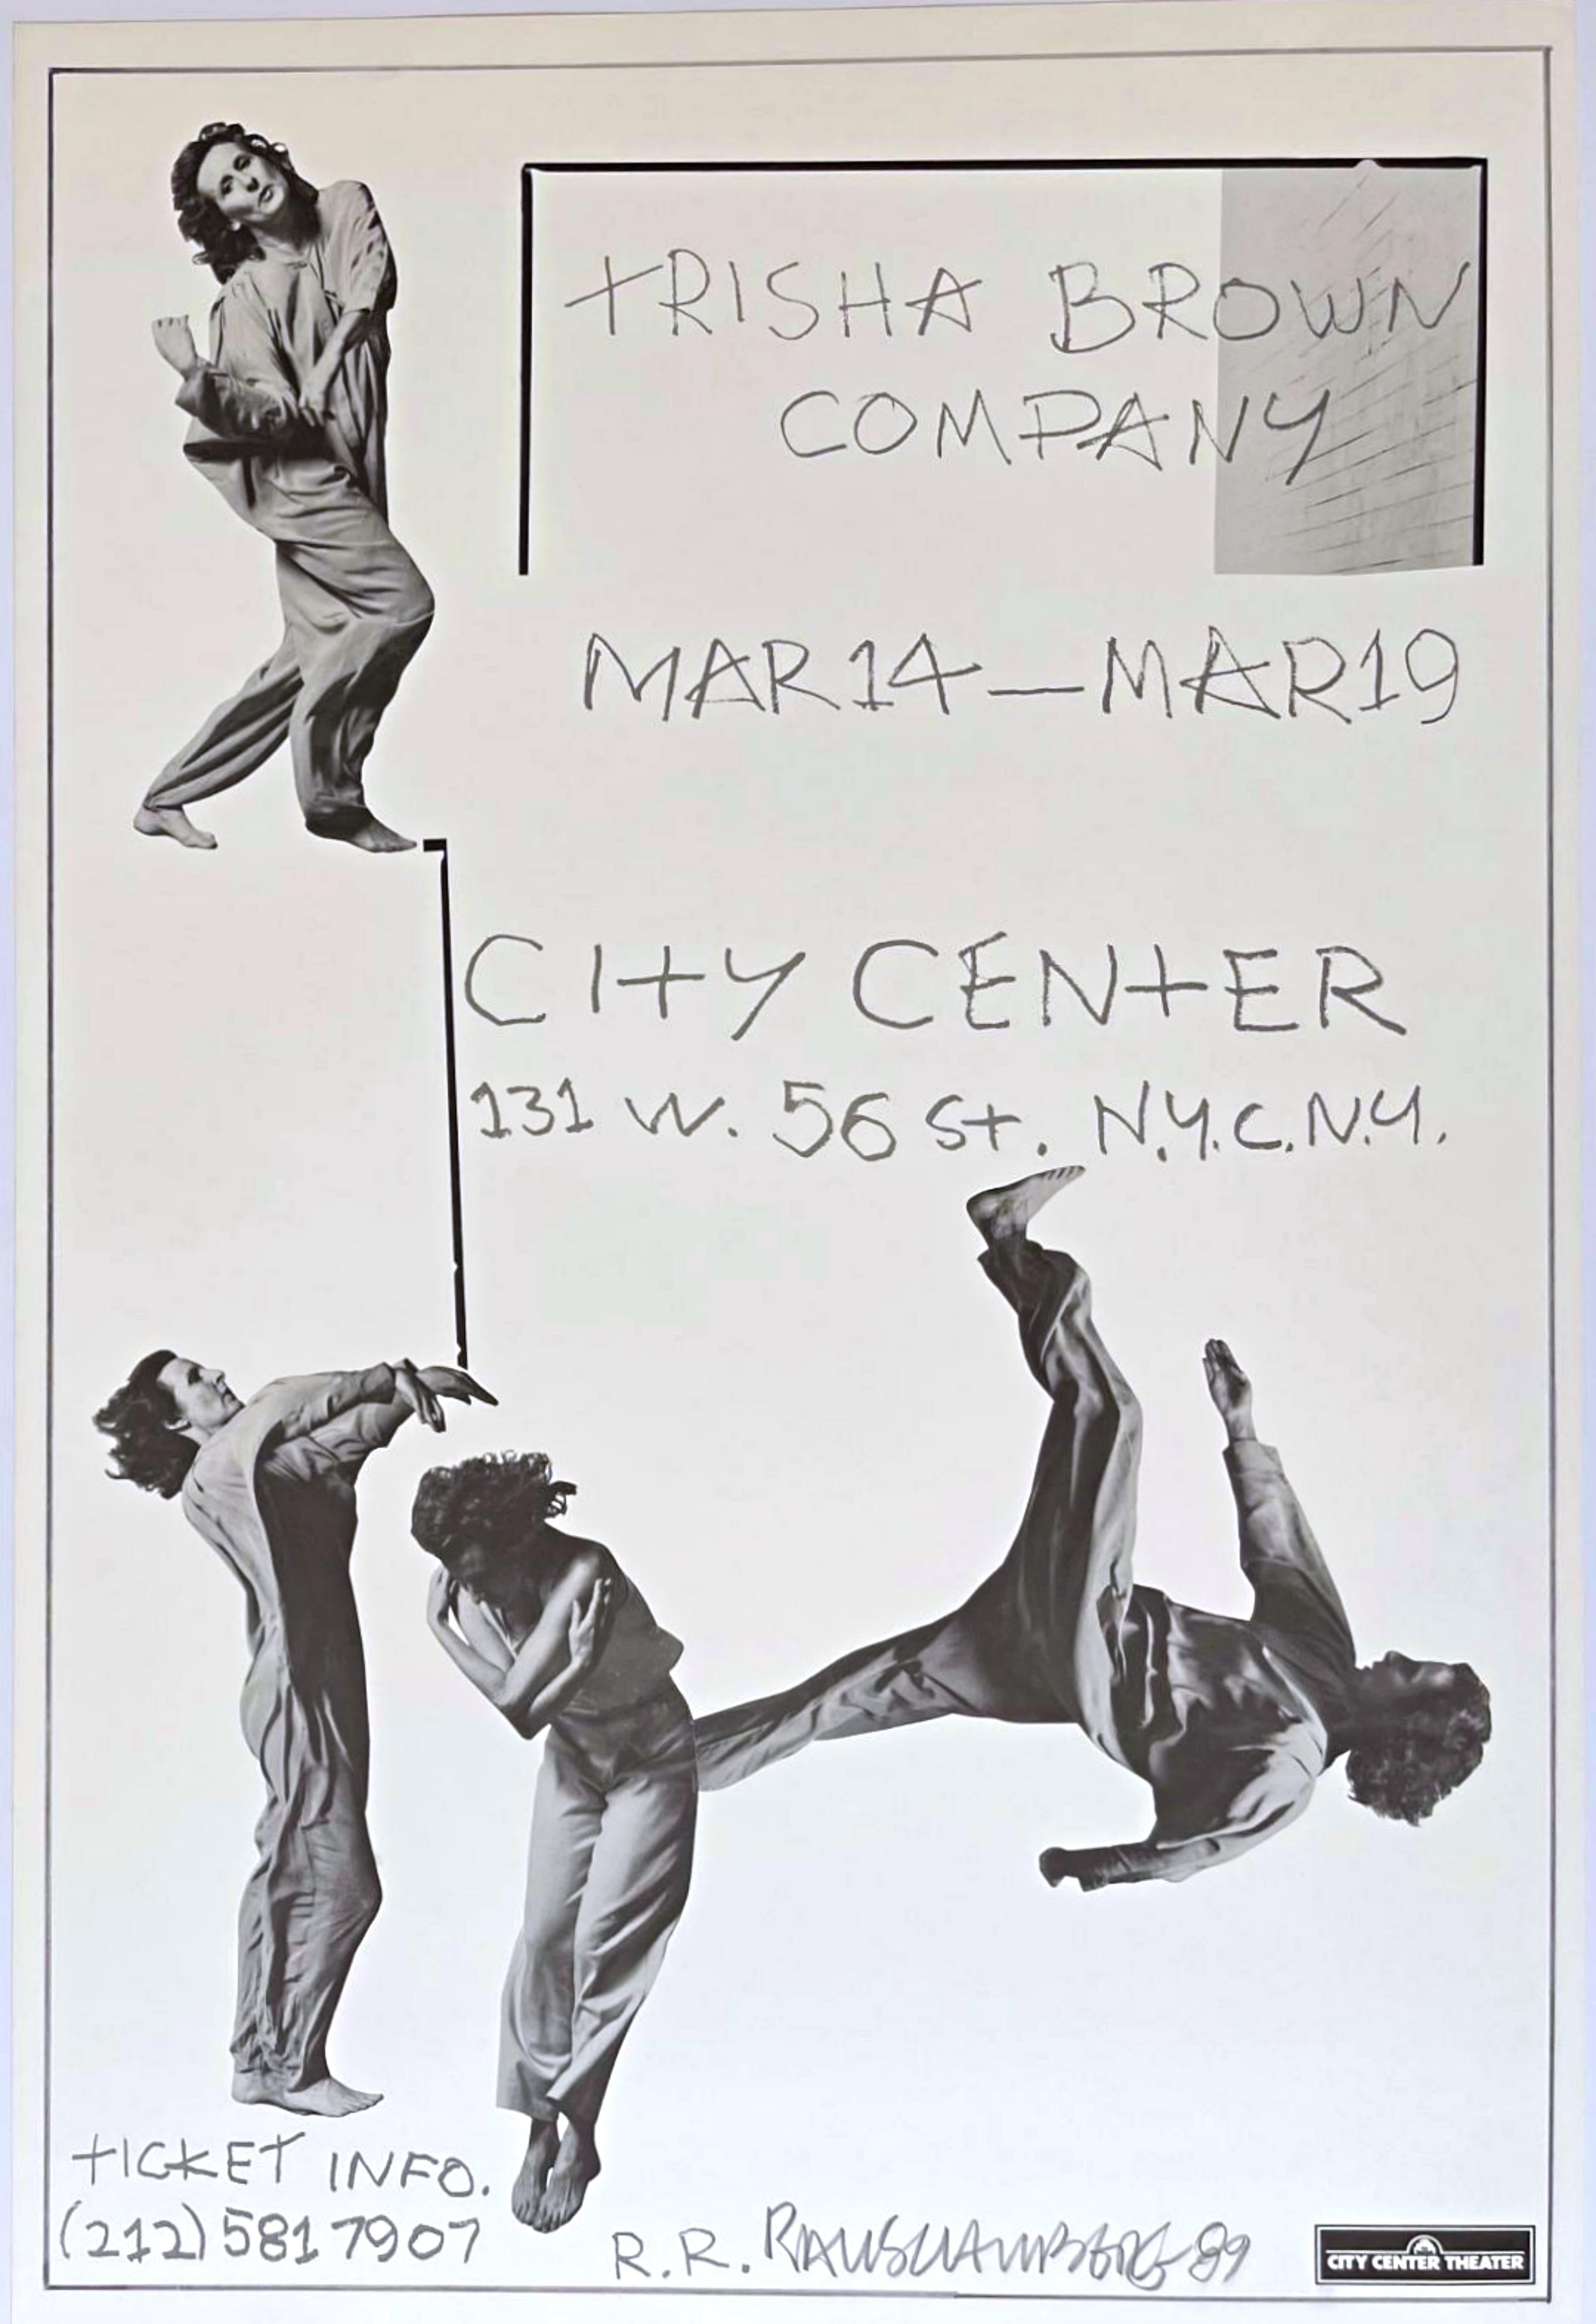 Robert Rauschenberg
Trisha Brown Company (Hand signed and dated), 1989
Offset lithograph (hand signed and dated by Robert Rauschenberg)
36 × 24 inches
Signed and dated '89 in graphite lower front
Published by City Center Theater, New York